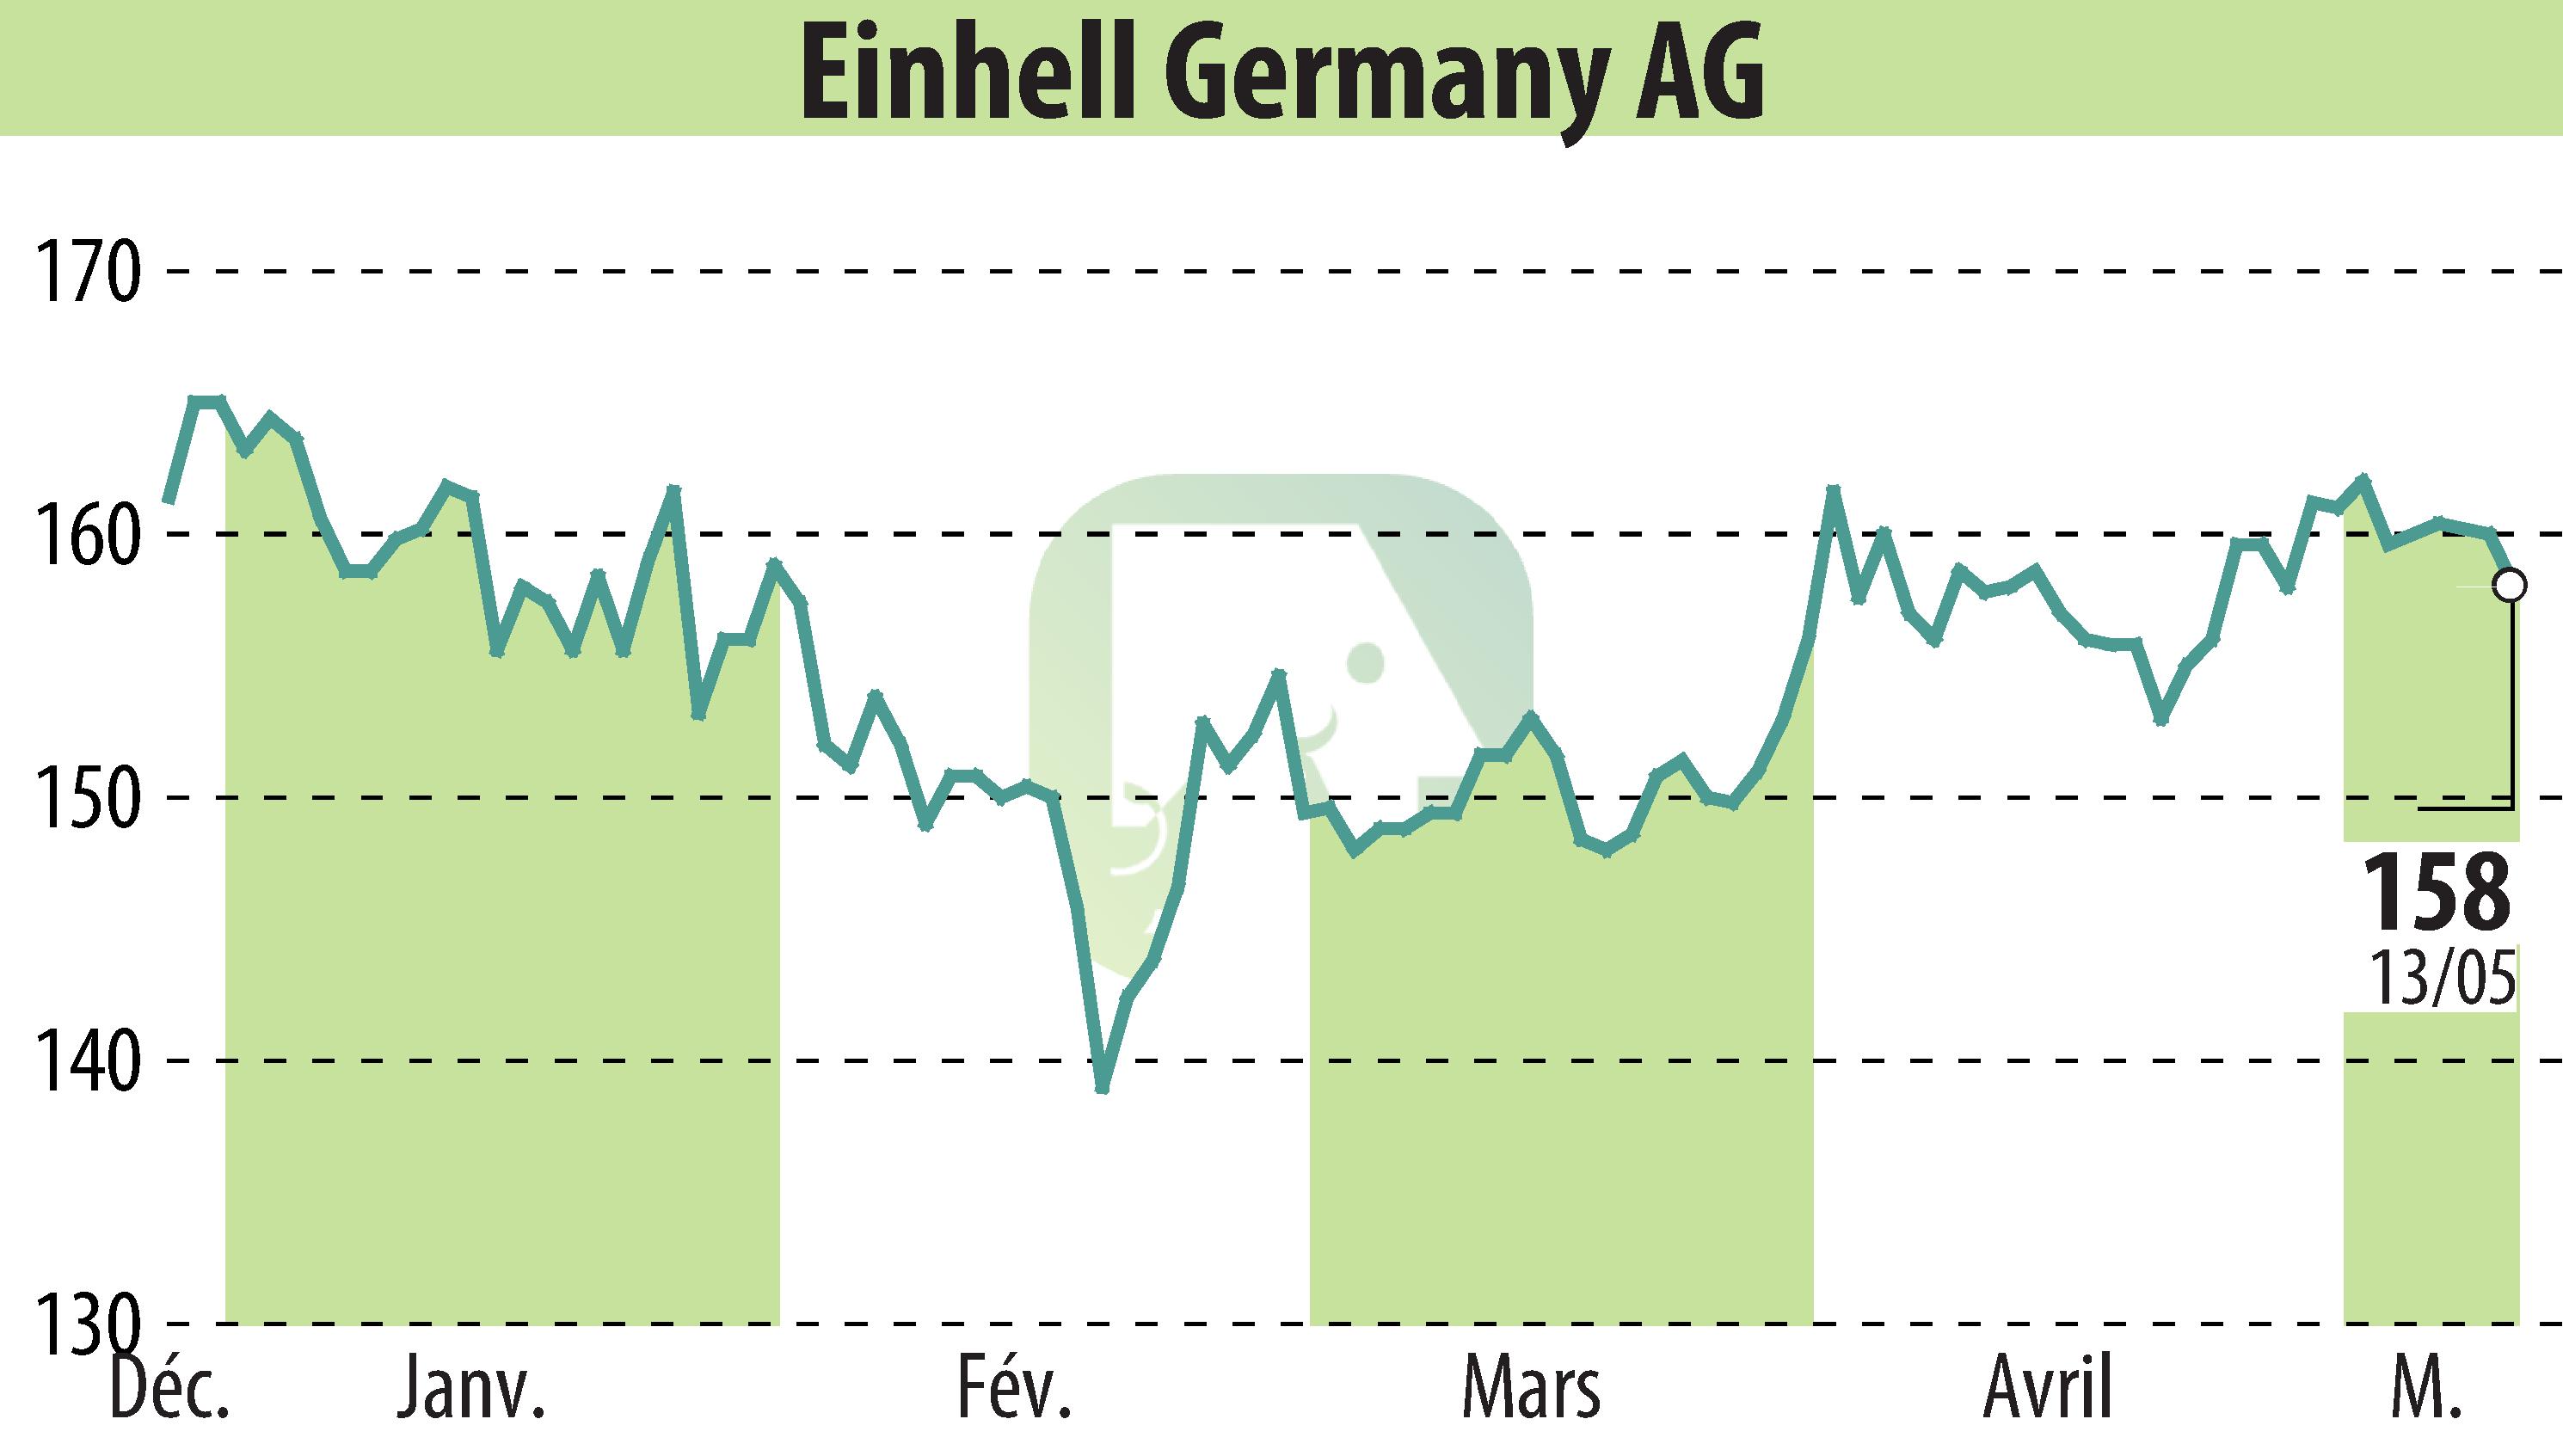 Stock price chart of Einhell Germany AG (EBR:EIN3) showing fluctuations.